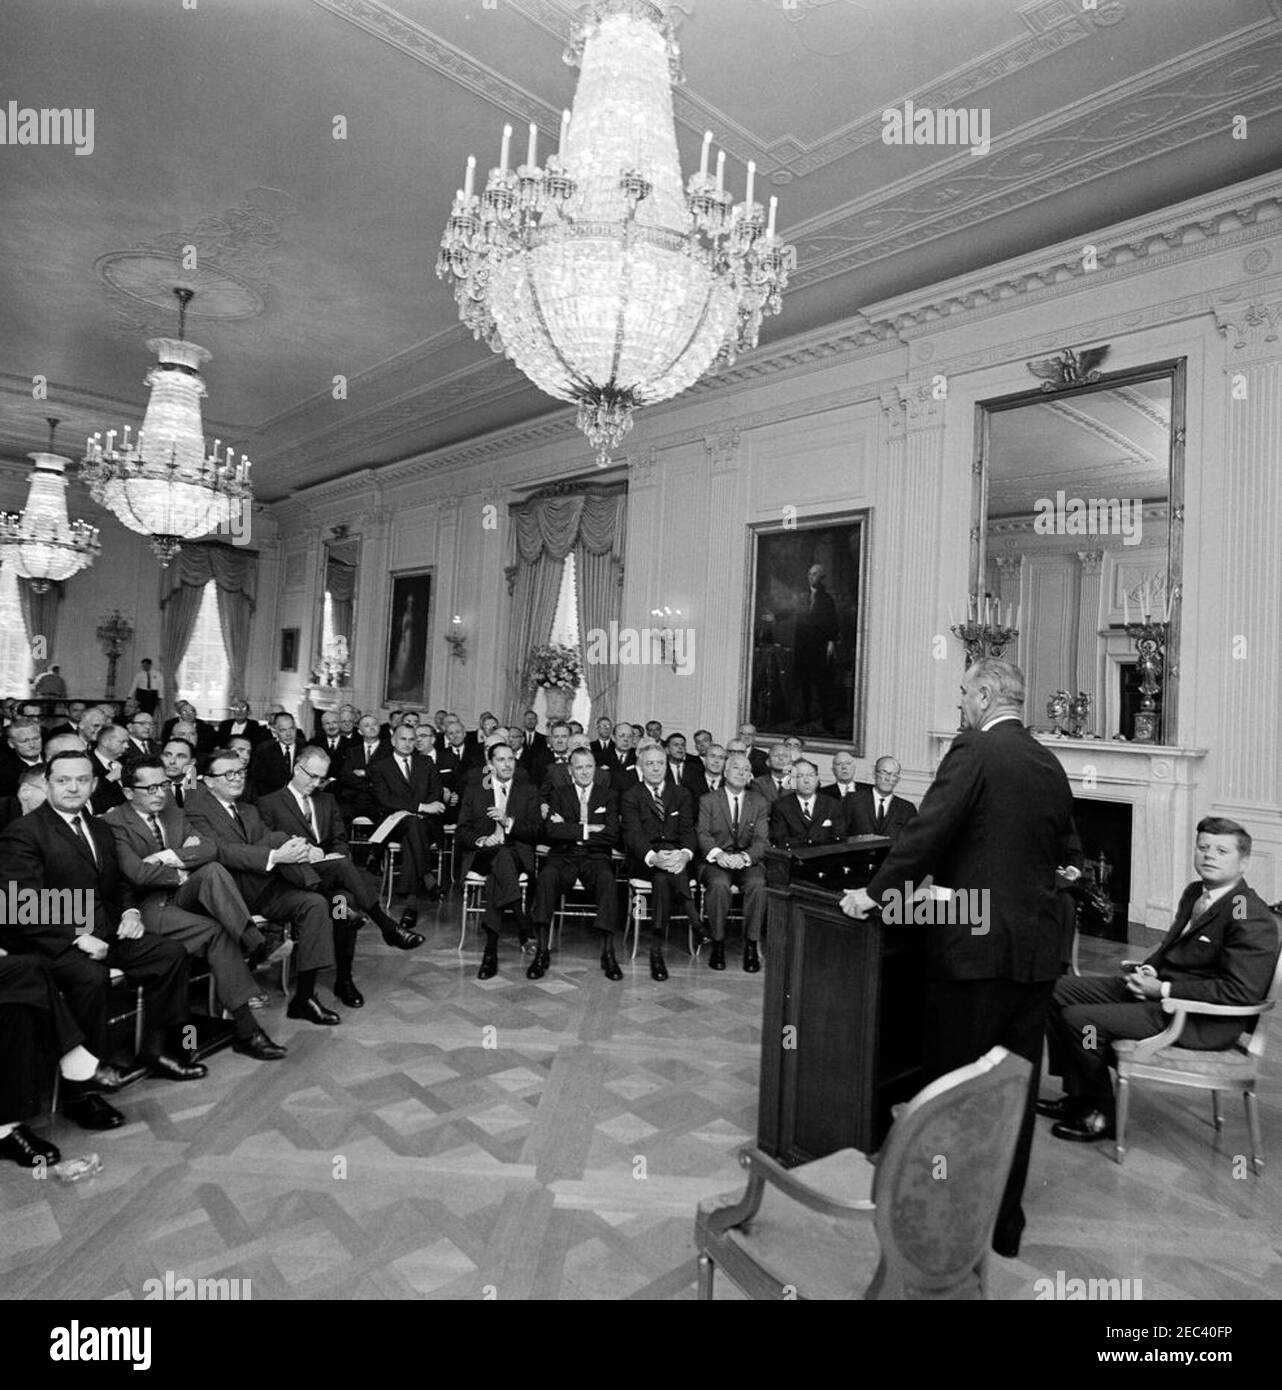 Meeting with businessmen to discuss civil rights, 5:22PM. Vice President Lyndon B. Johnson (at lectern, with back to camera) speaks to a group of business executives with establishments in southern cities, at a civil rights meeting conducted by President John F. Kennedy (seated at far right), Vice President Johnson, and Attorney General Robert F. Kennedy (not pictured). Those pictured include: Milton L. Elsberg, President of Drug Fair Inc.; Carling L. Dinkler, Jr., President of Dinkler Hotel Corporation; Lucien E. Oliver, Vice President of Sears, Roebuck u0026 Company; Louis C. Lustenberger, Stock Photo